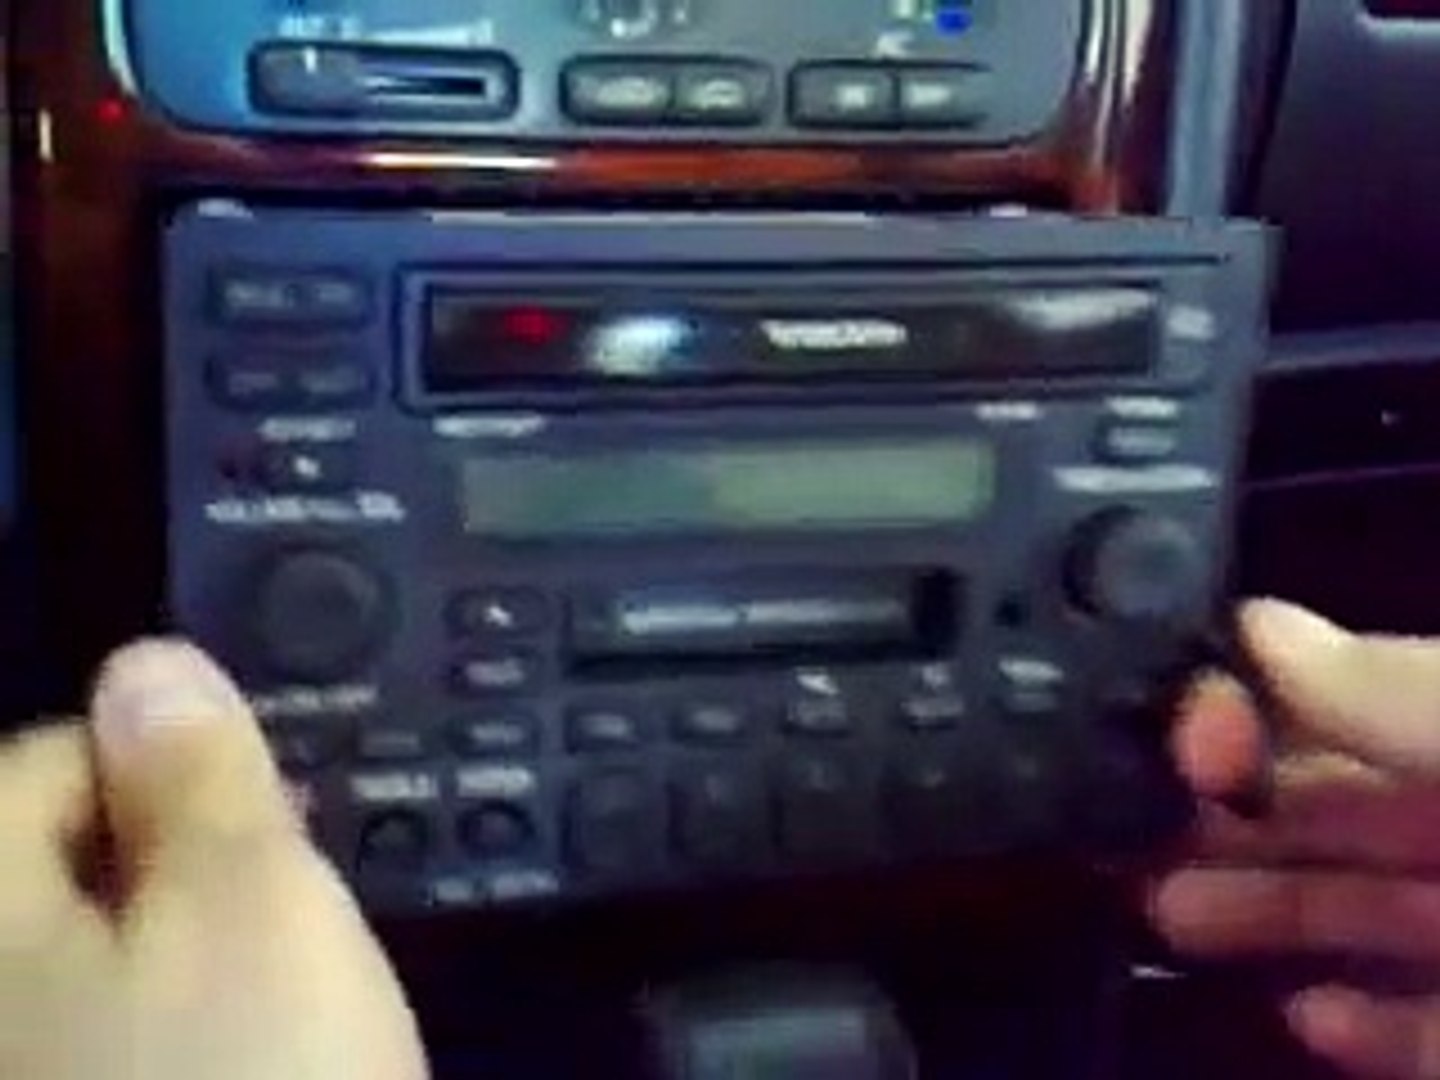 How to change cd player in a volvo s70 v70 c70 850 - video Dailymotion